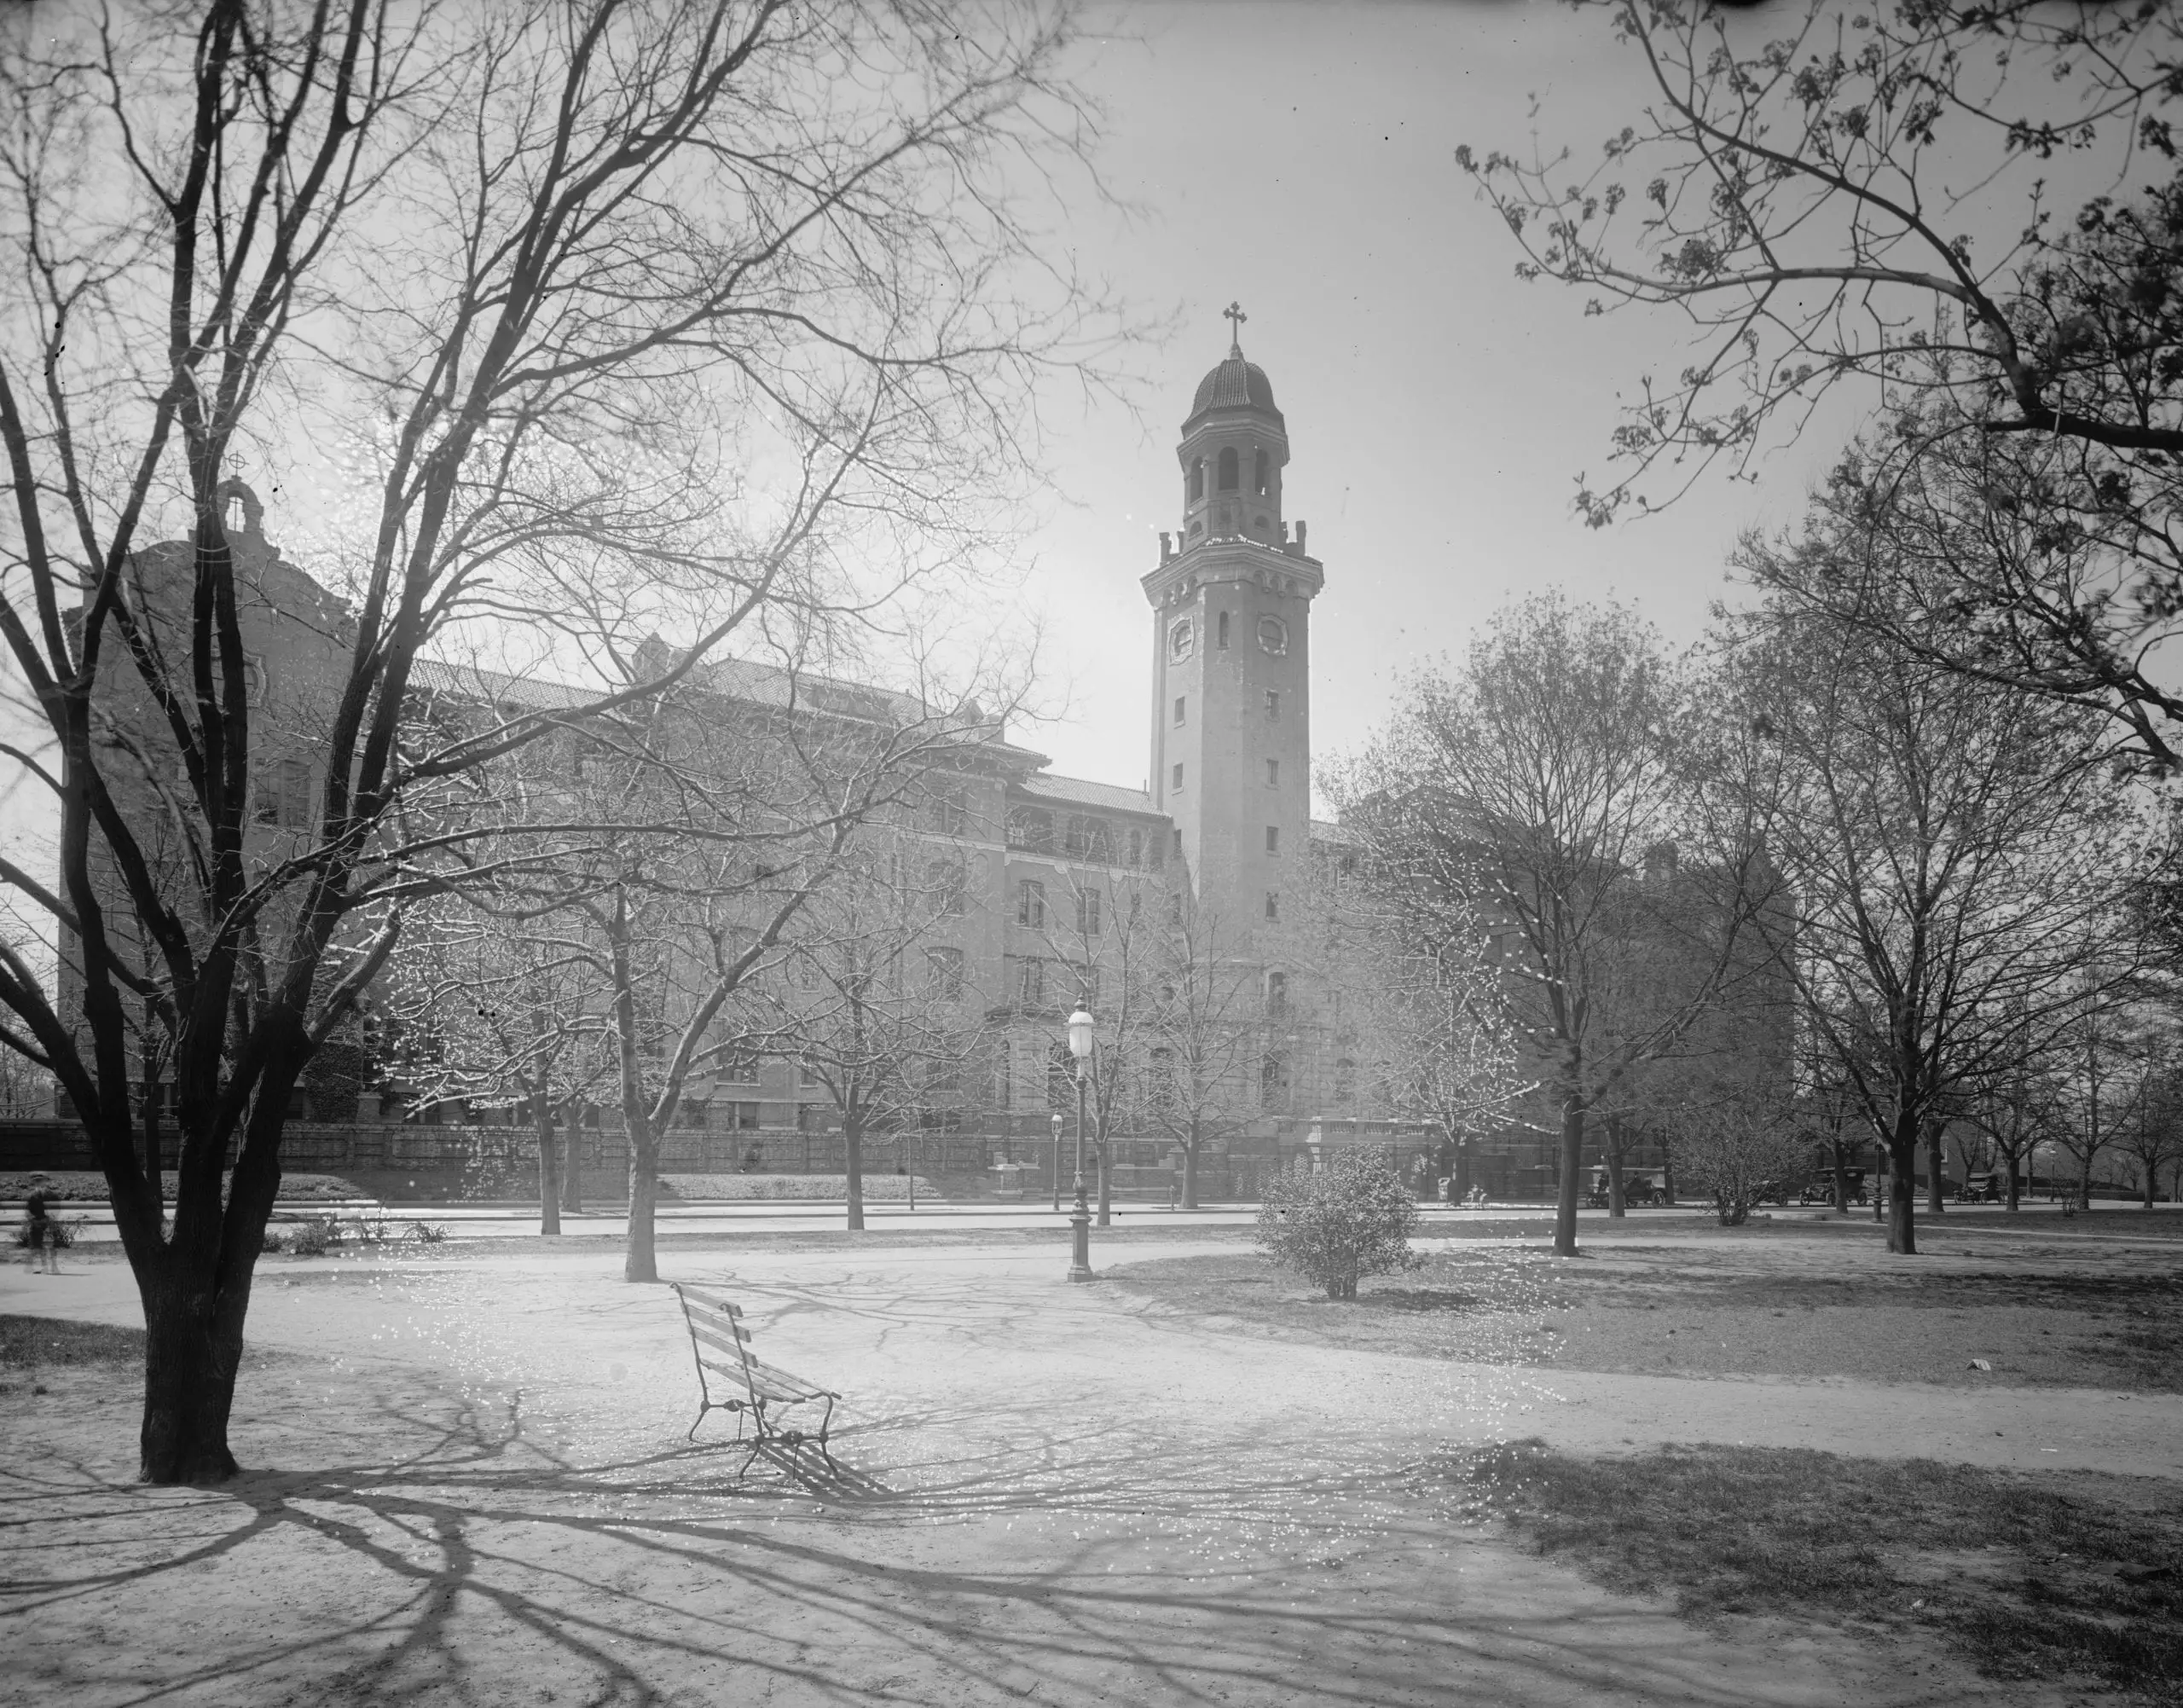 Providence Hospital in the early 1900s (Library of Congress)